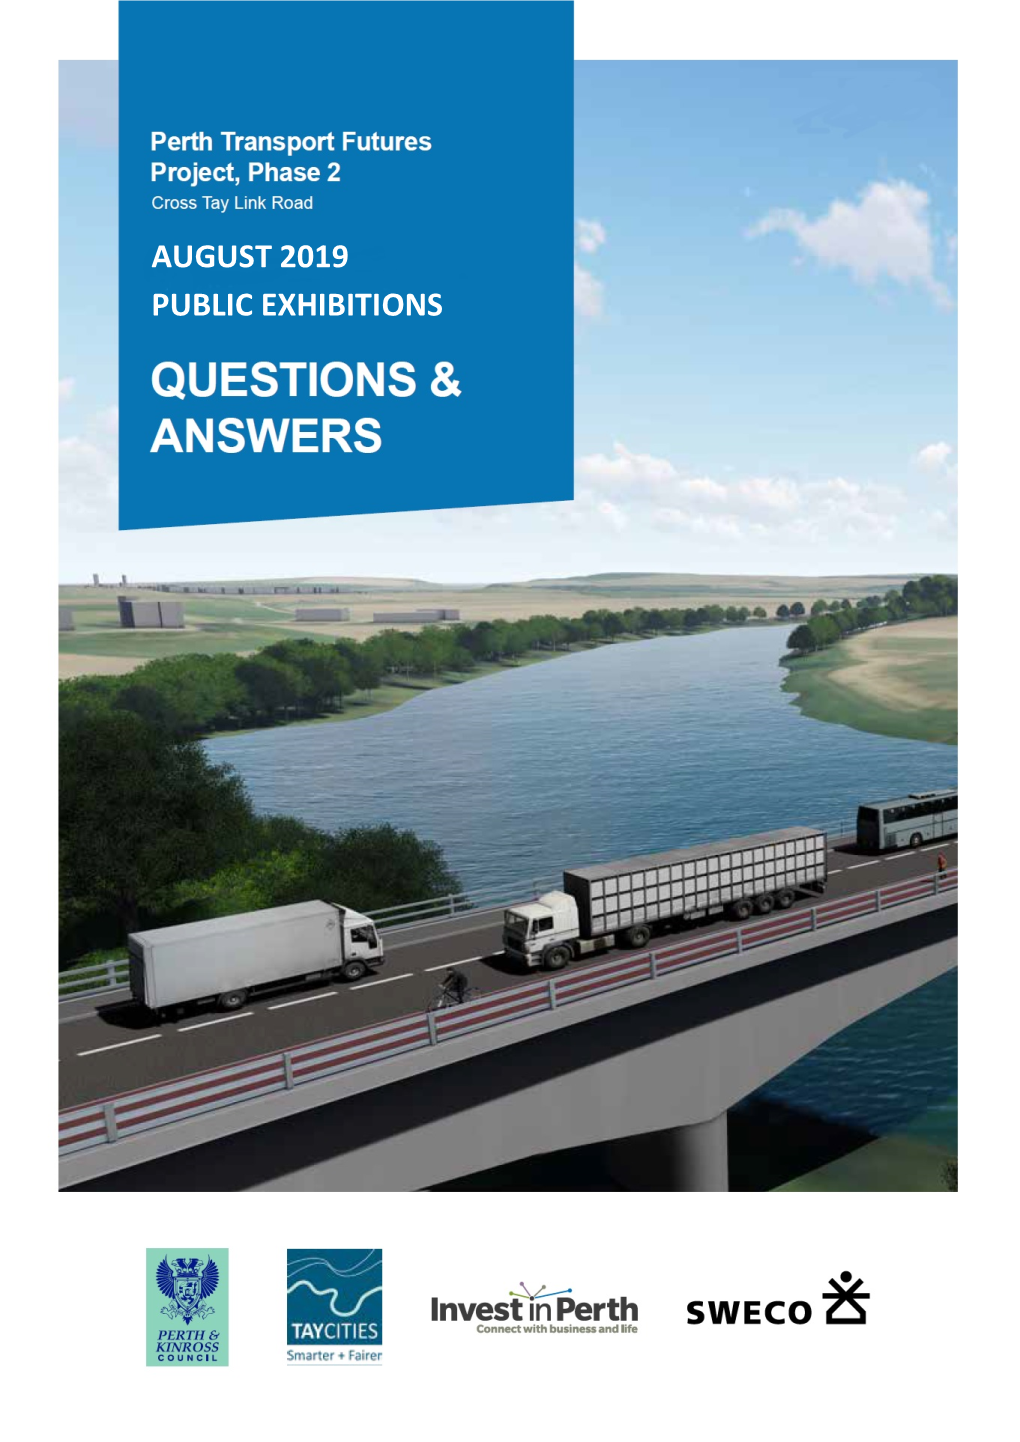 AUGUST 2019 PUBLIC EXHIBITIONS Perth Transport Futures Project - Phase 2 - Cross Tay Link Road Summer 2019 Public Exhibition Events Questions & Answers